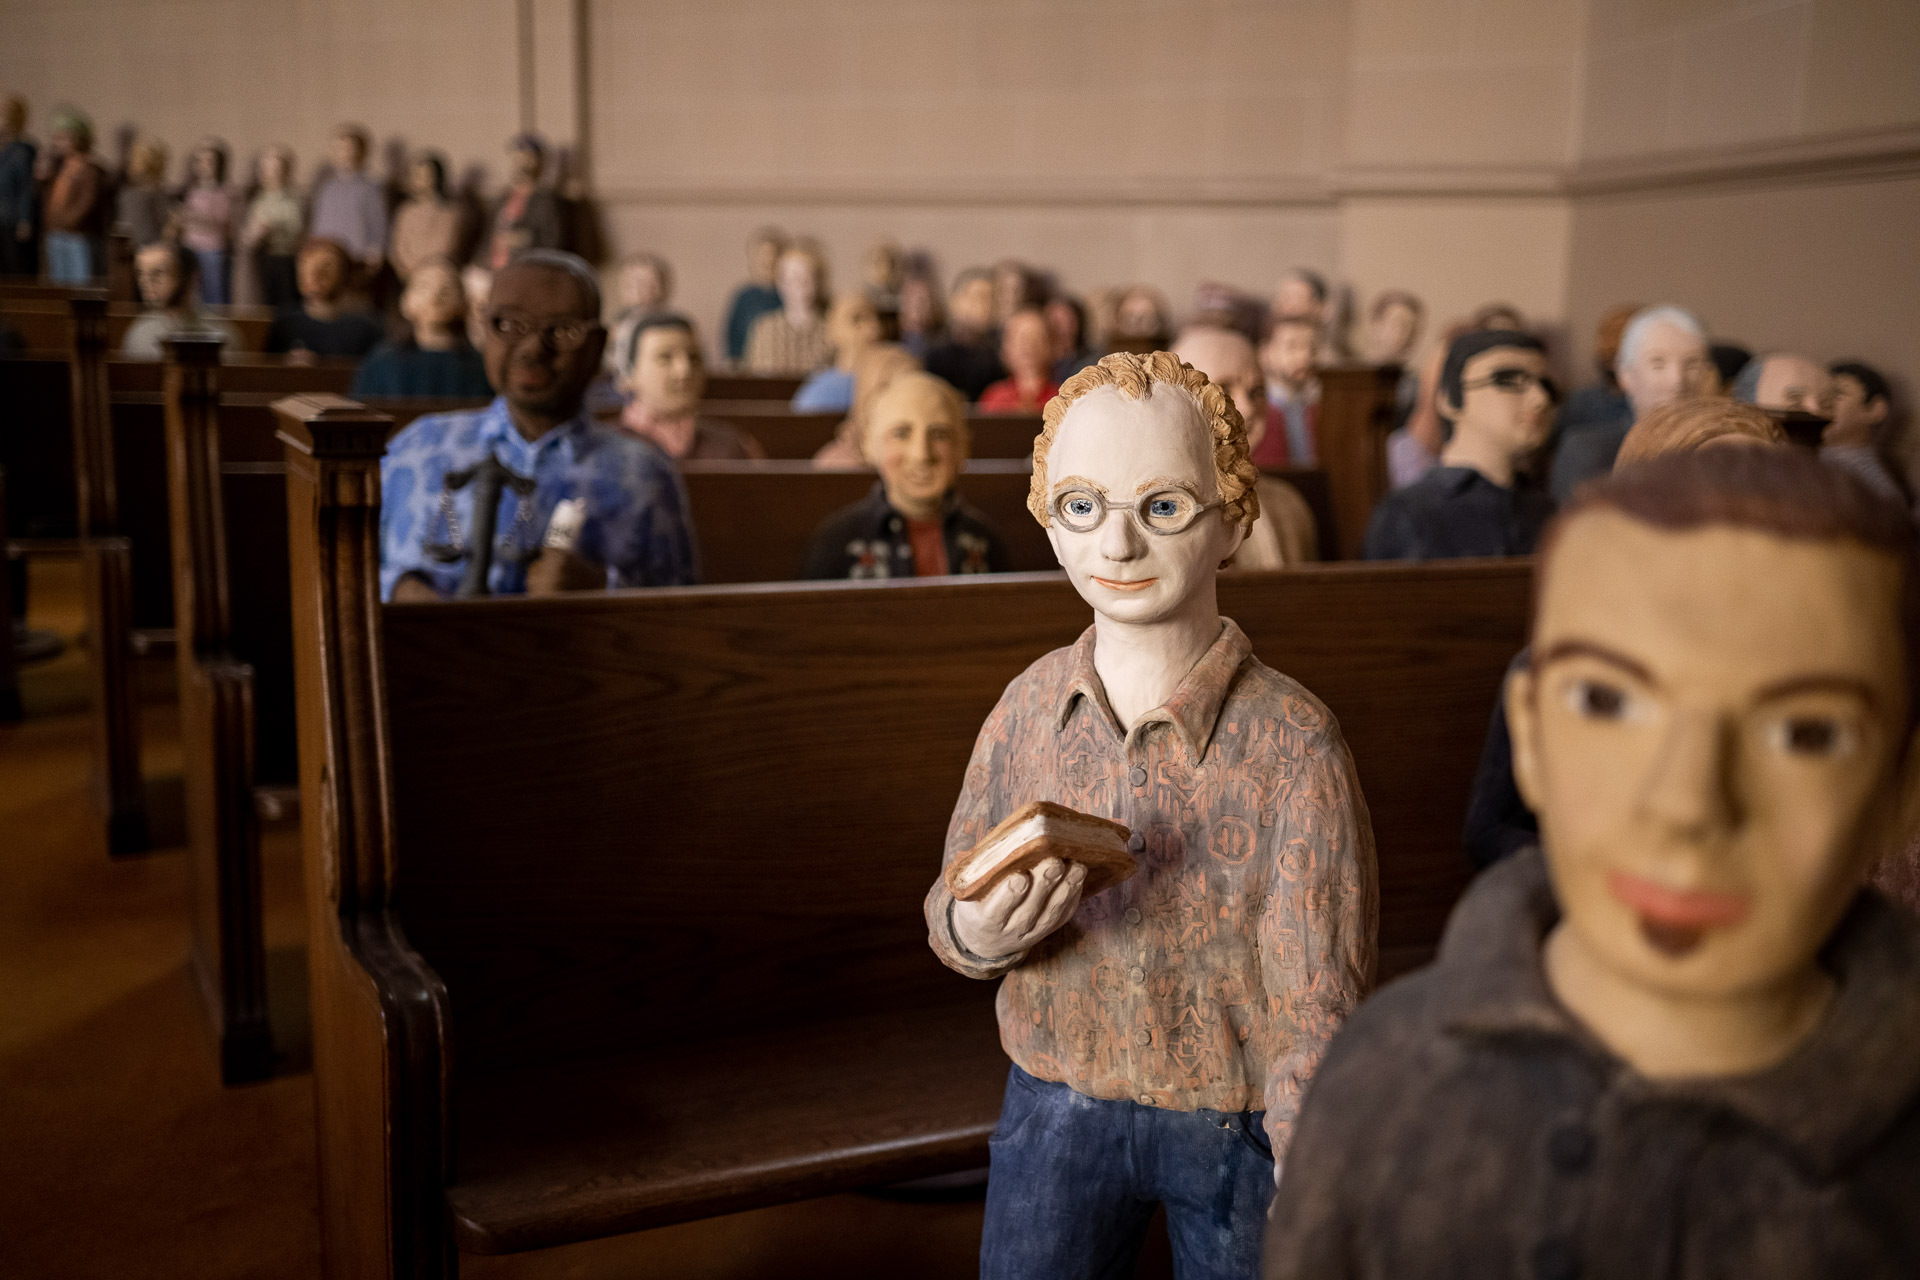 A photo of what appear to be dozens of clay figurines which are delicately painted and apparently standing near church pews